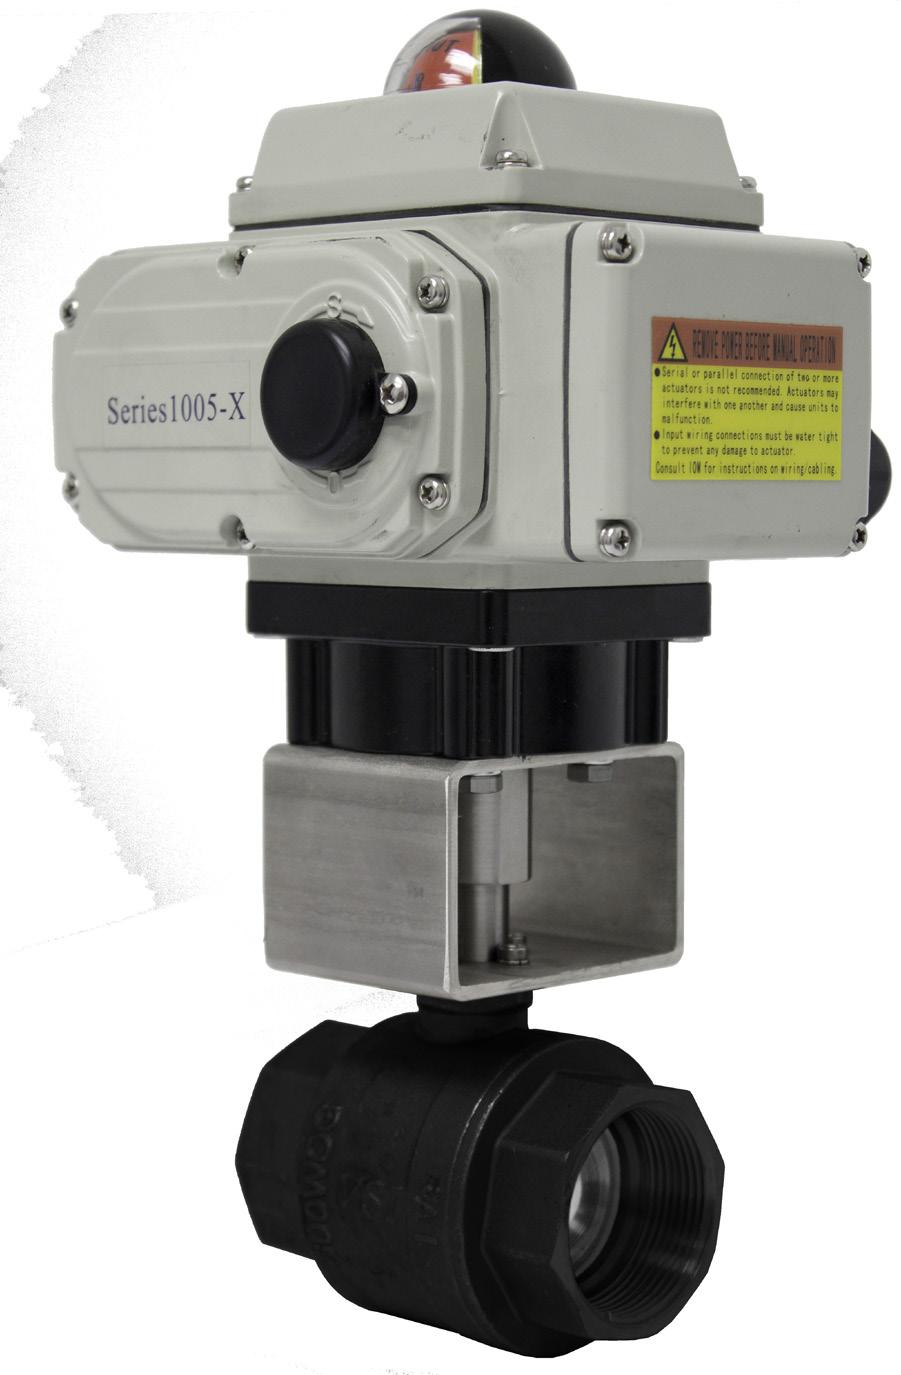 General Information Modified V-Port cast directly into the ball High Rangeability: 300:1 Turn down ratio Flow Characteristic: Modified Equal Percentage Low Torque - will accept most damper actuators